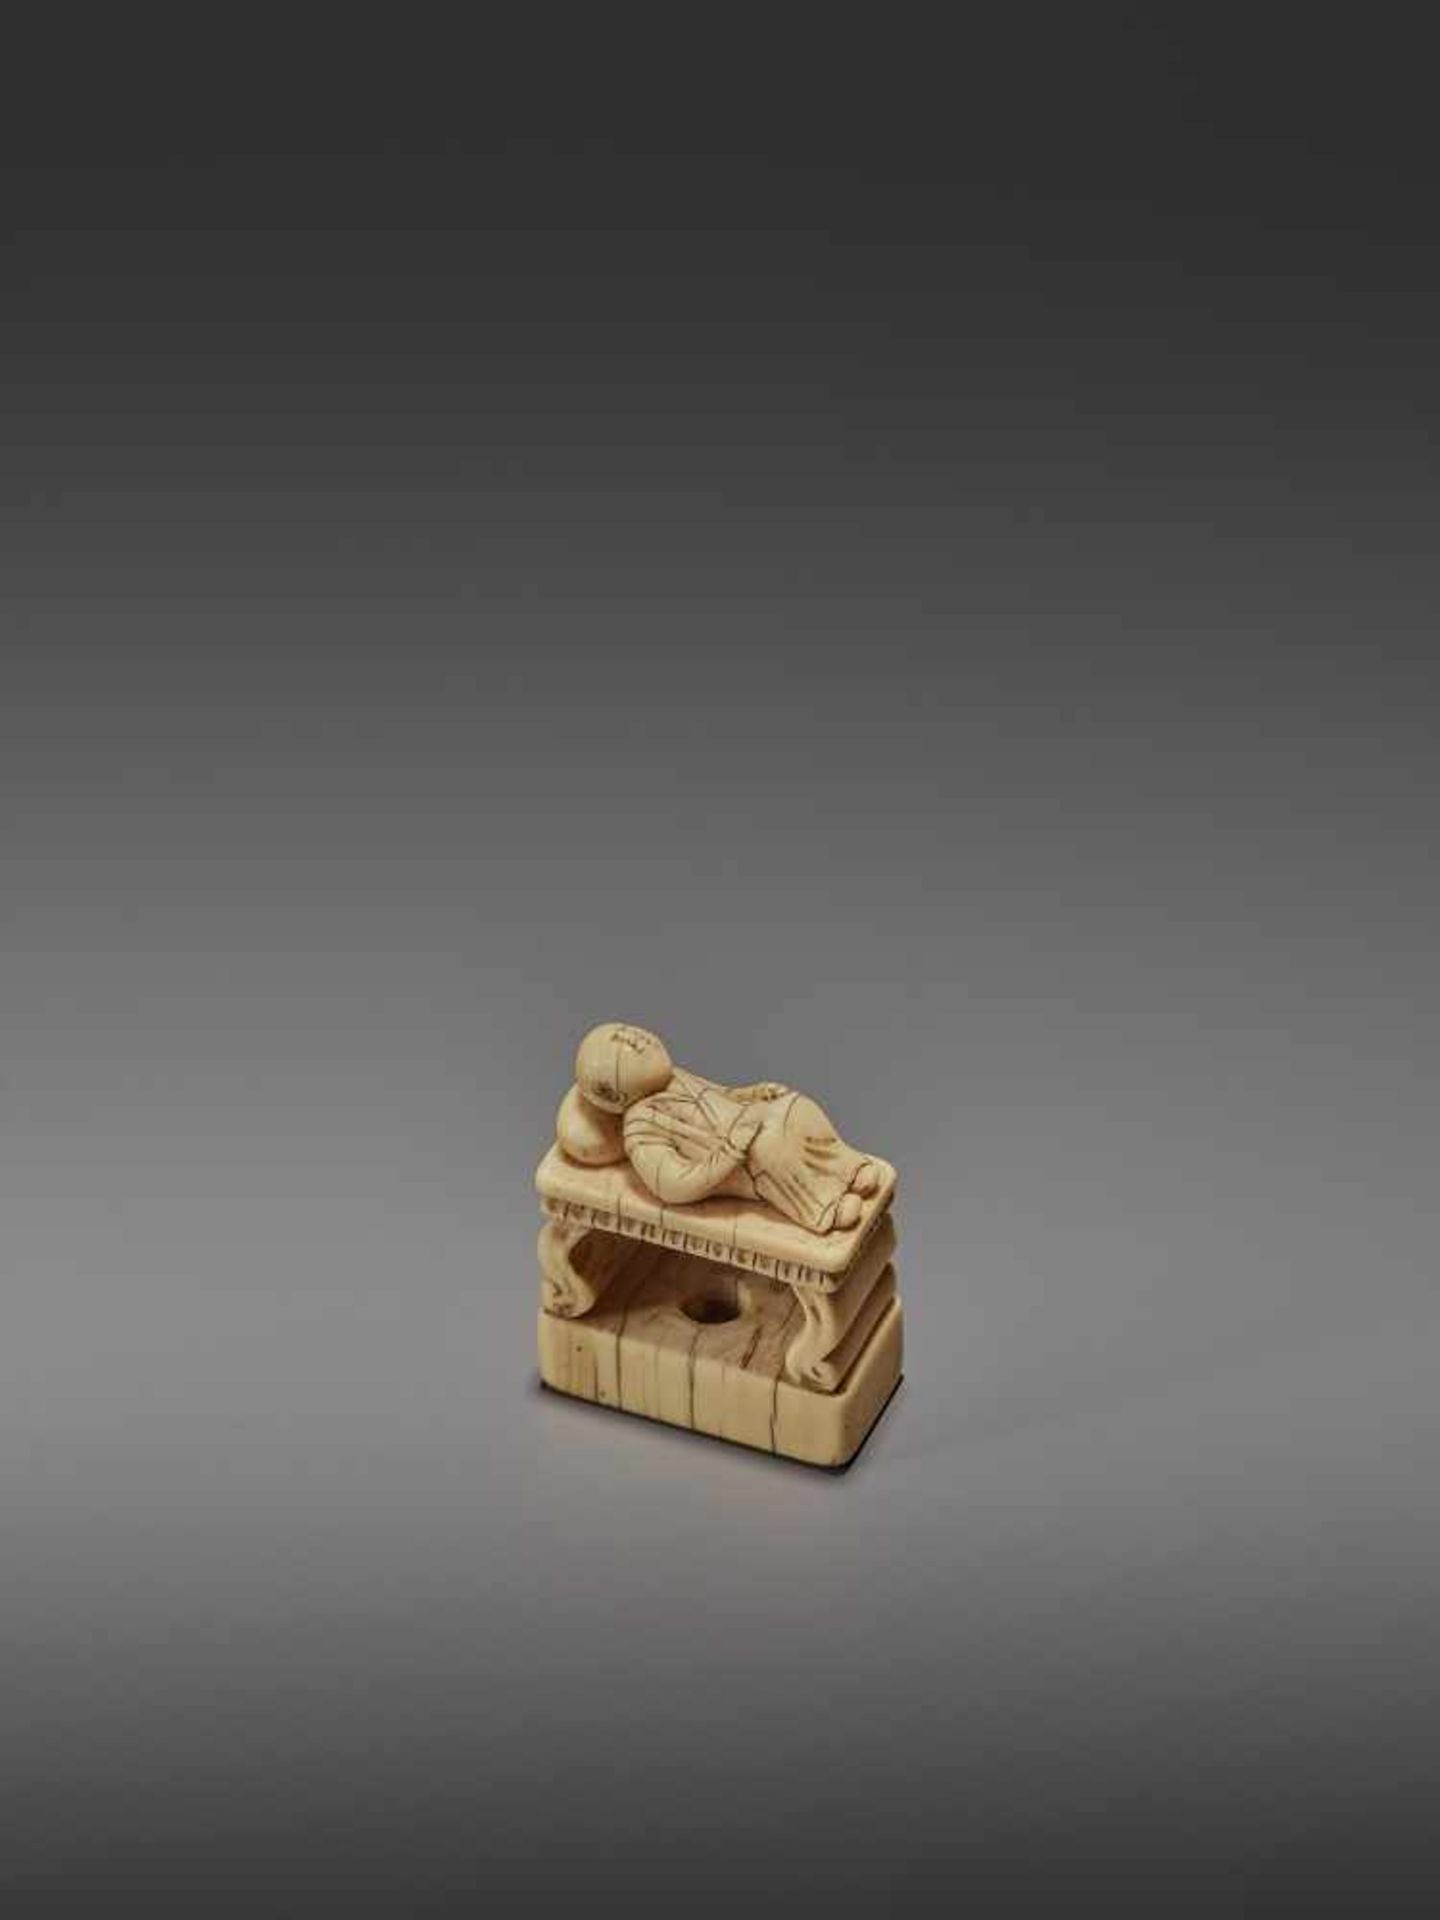 AN EARLY IVORY NETSUKE OF A CHINESE MAN SLEEPING ON AN OPIUM BED UnsignedJapan, early 18th - Image 9 of 11